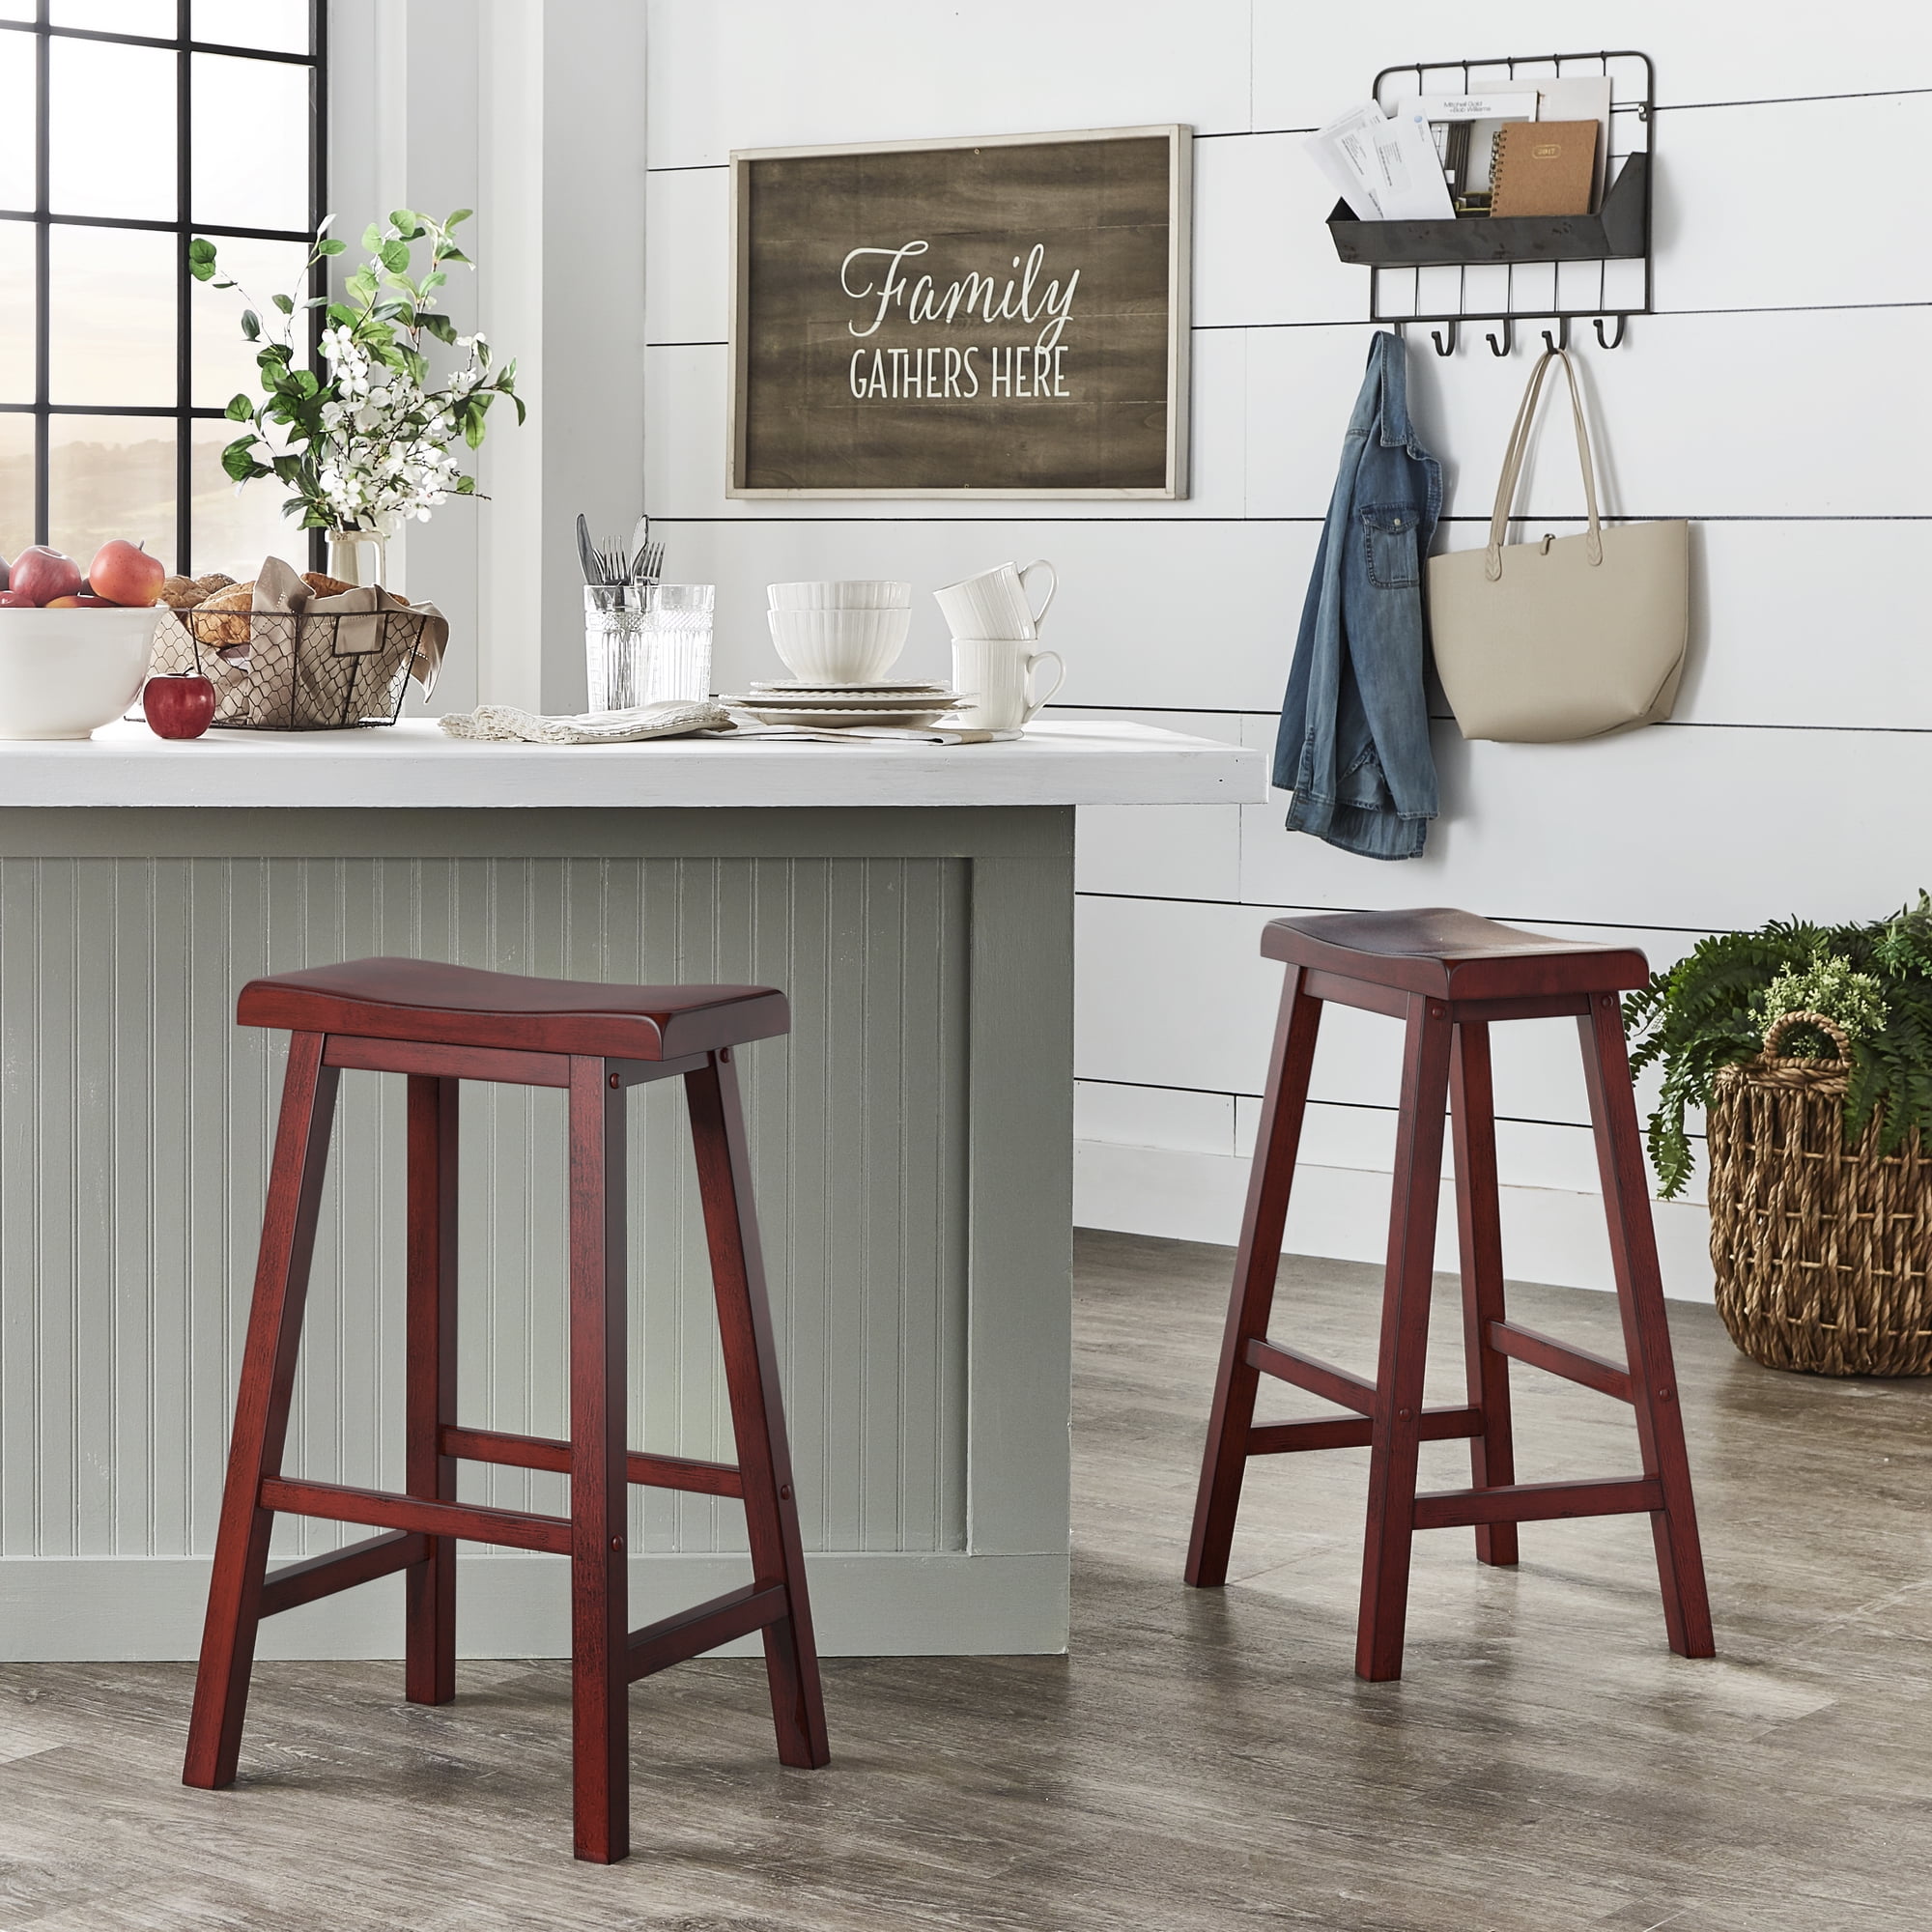 Weston Home Ashby Saddle Seat Backless, Bar And Stool Set For Home